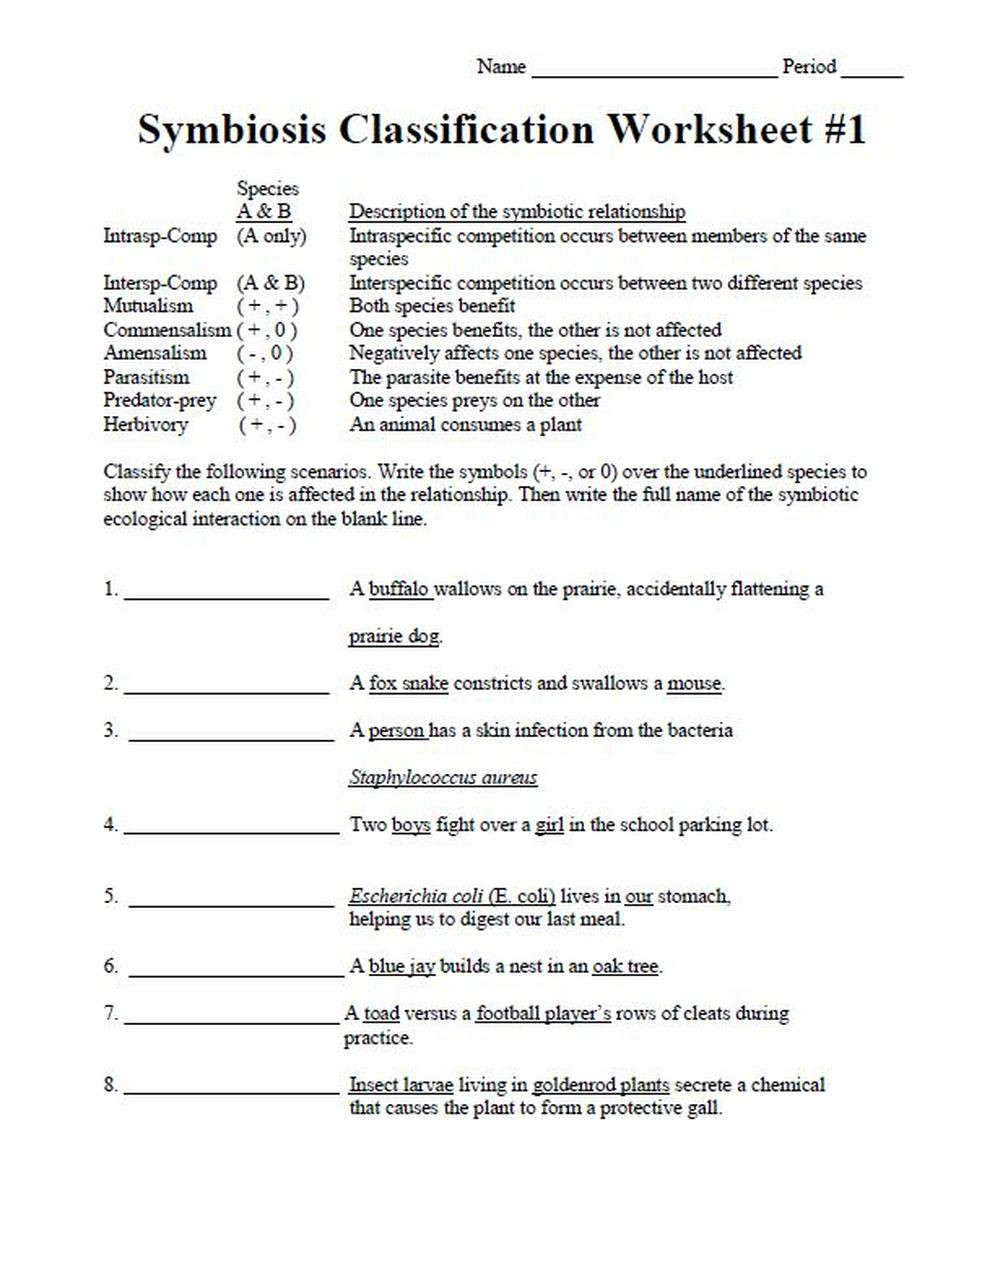 Symbiosis Worksheet Answer Key Interactions Of Species Classification Activity 1